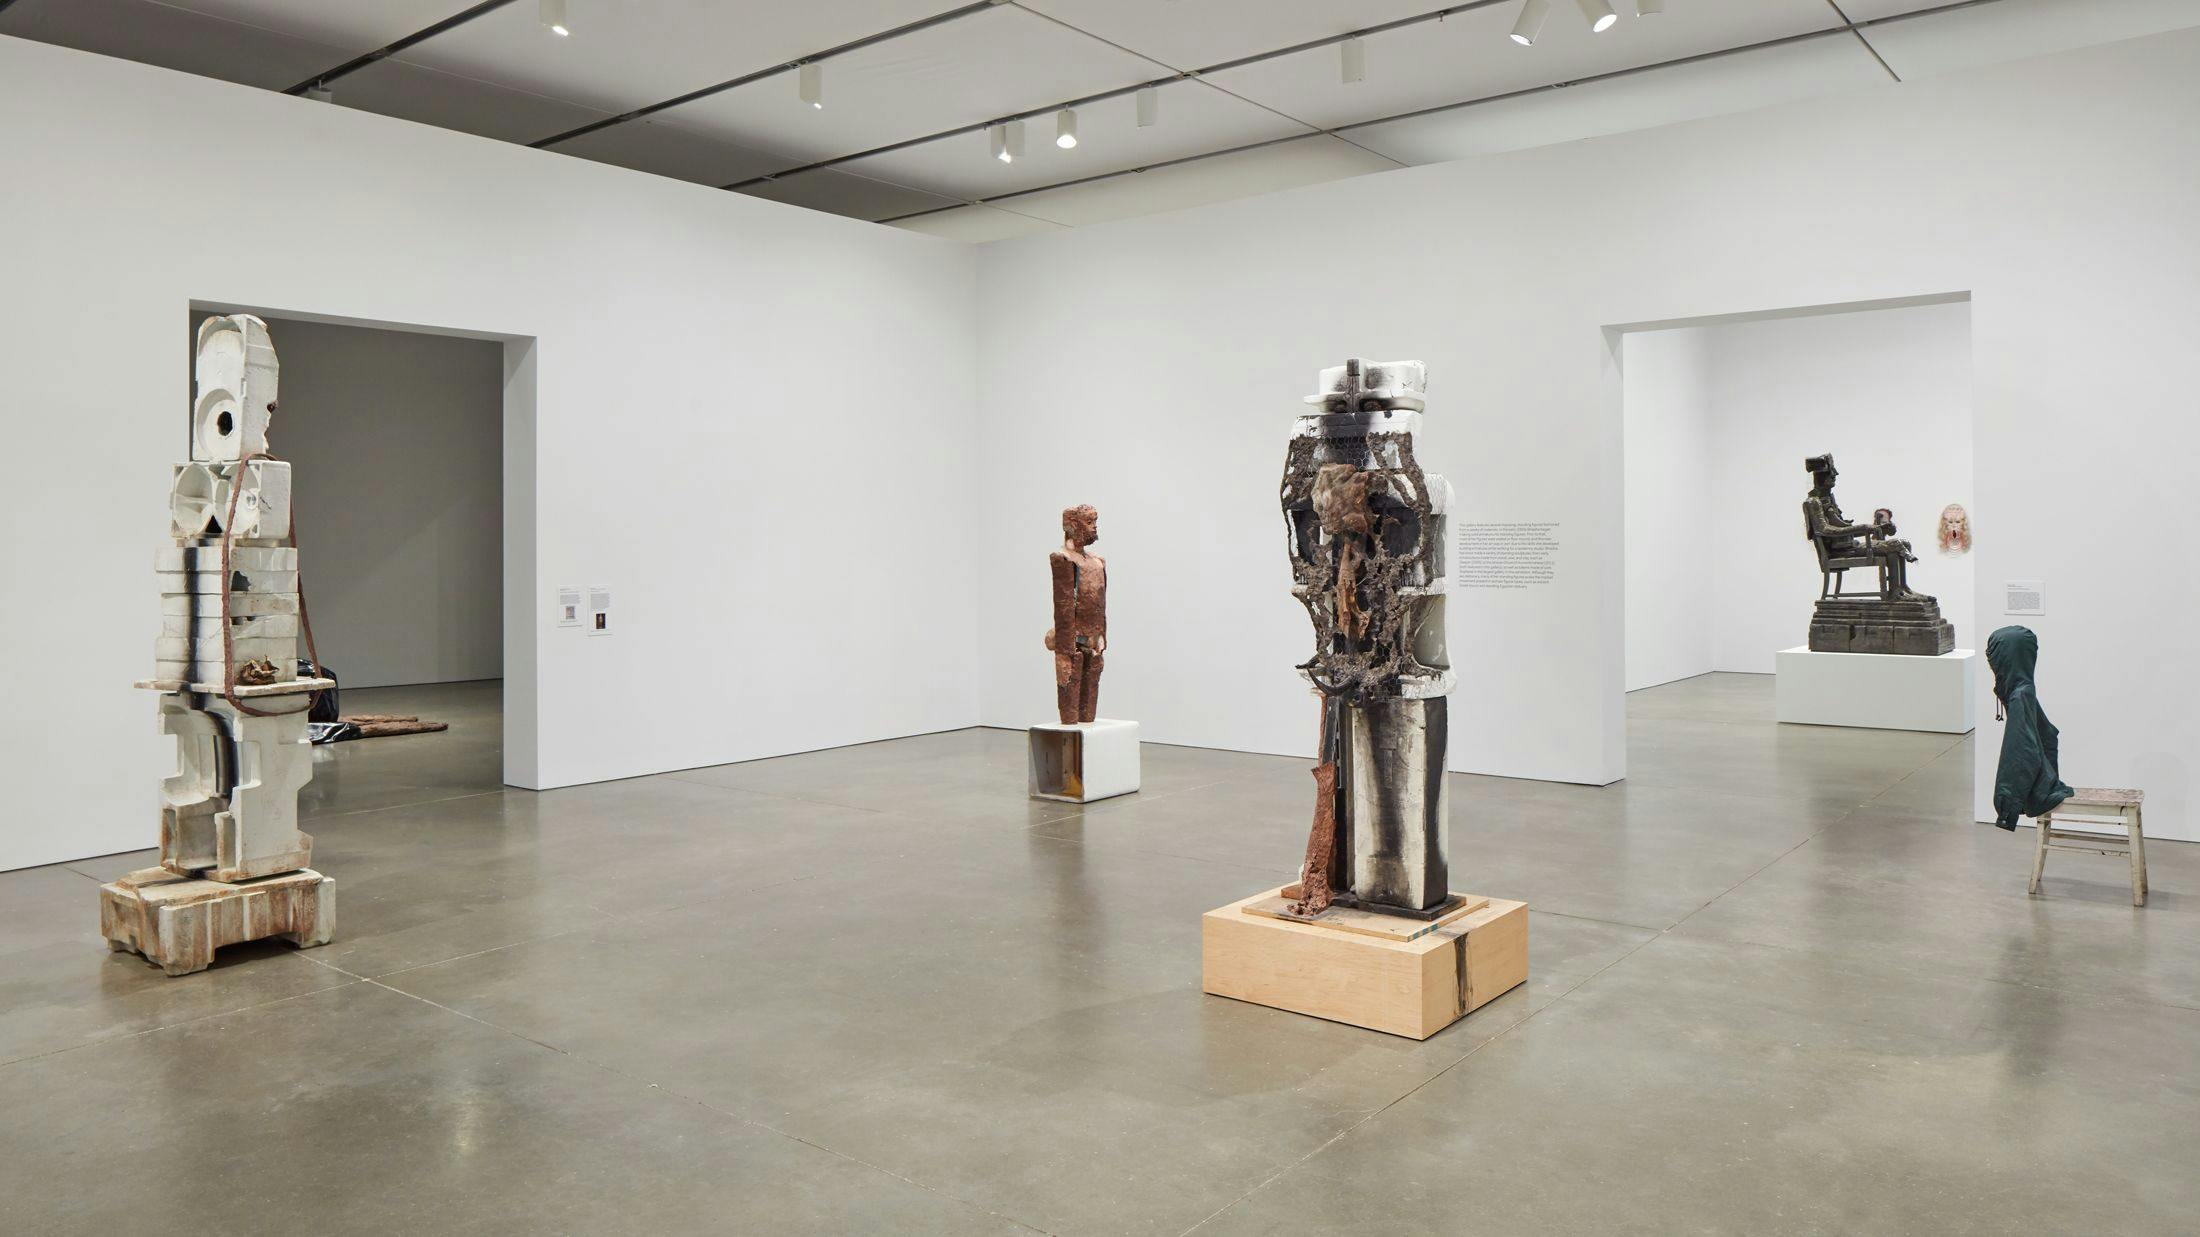 Installation view of the exhibition, Huma Bhabha: They Live, at the Institute of Contemporary Art Boston in Boston, dated 2019.